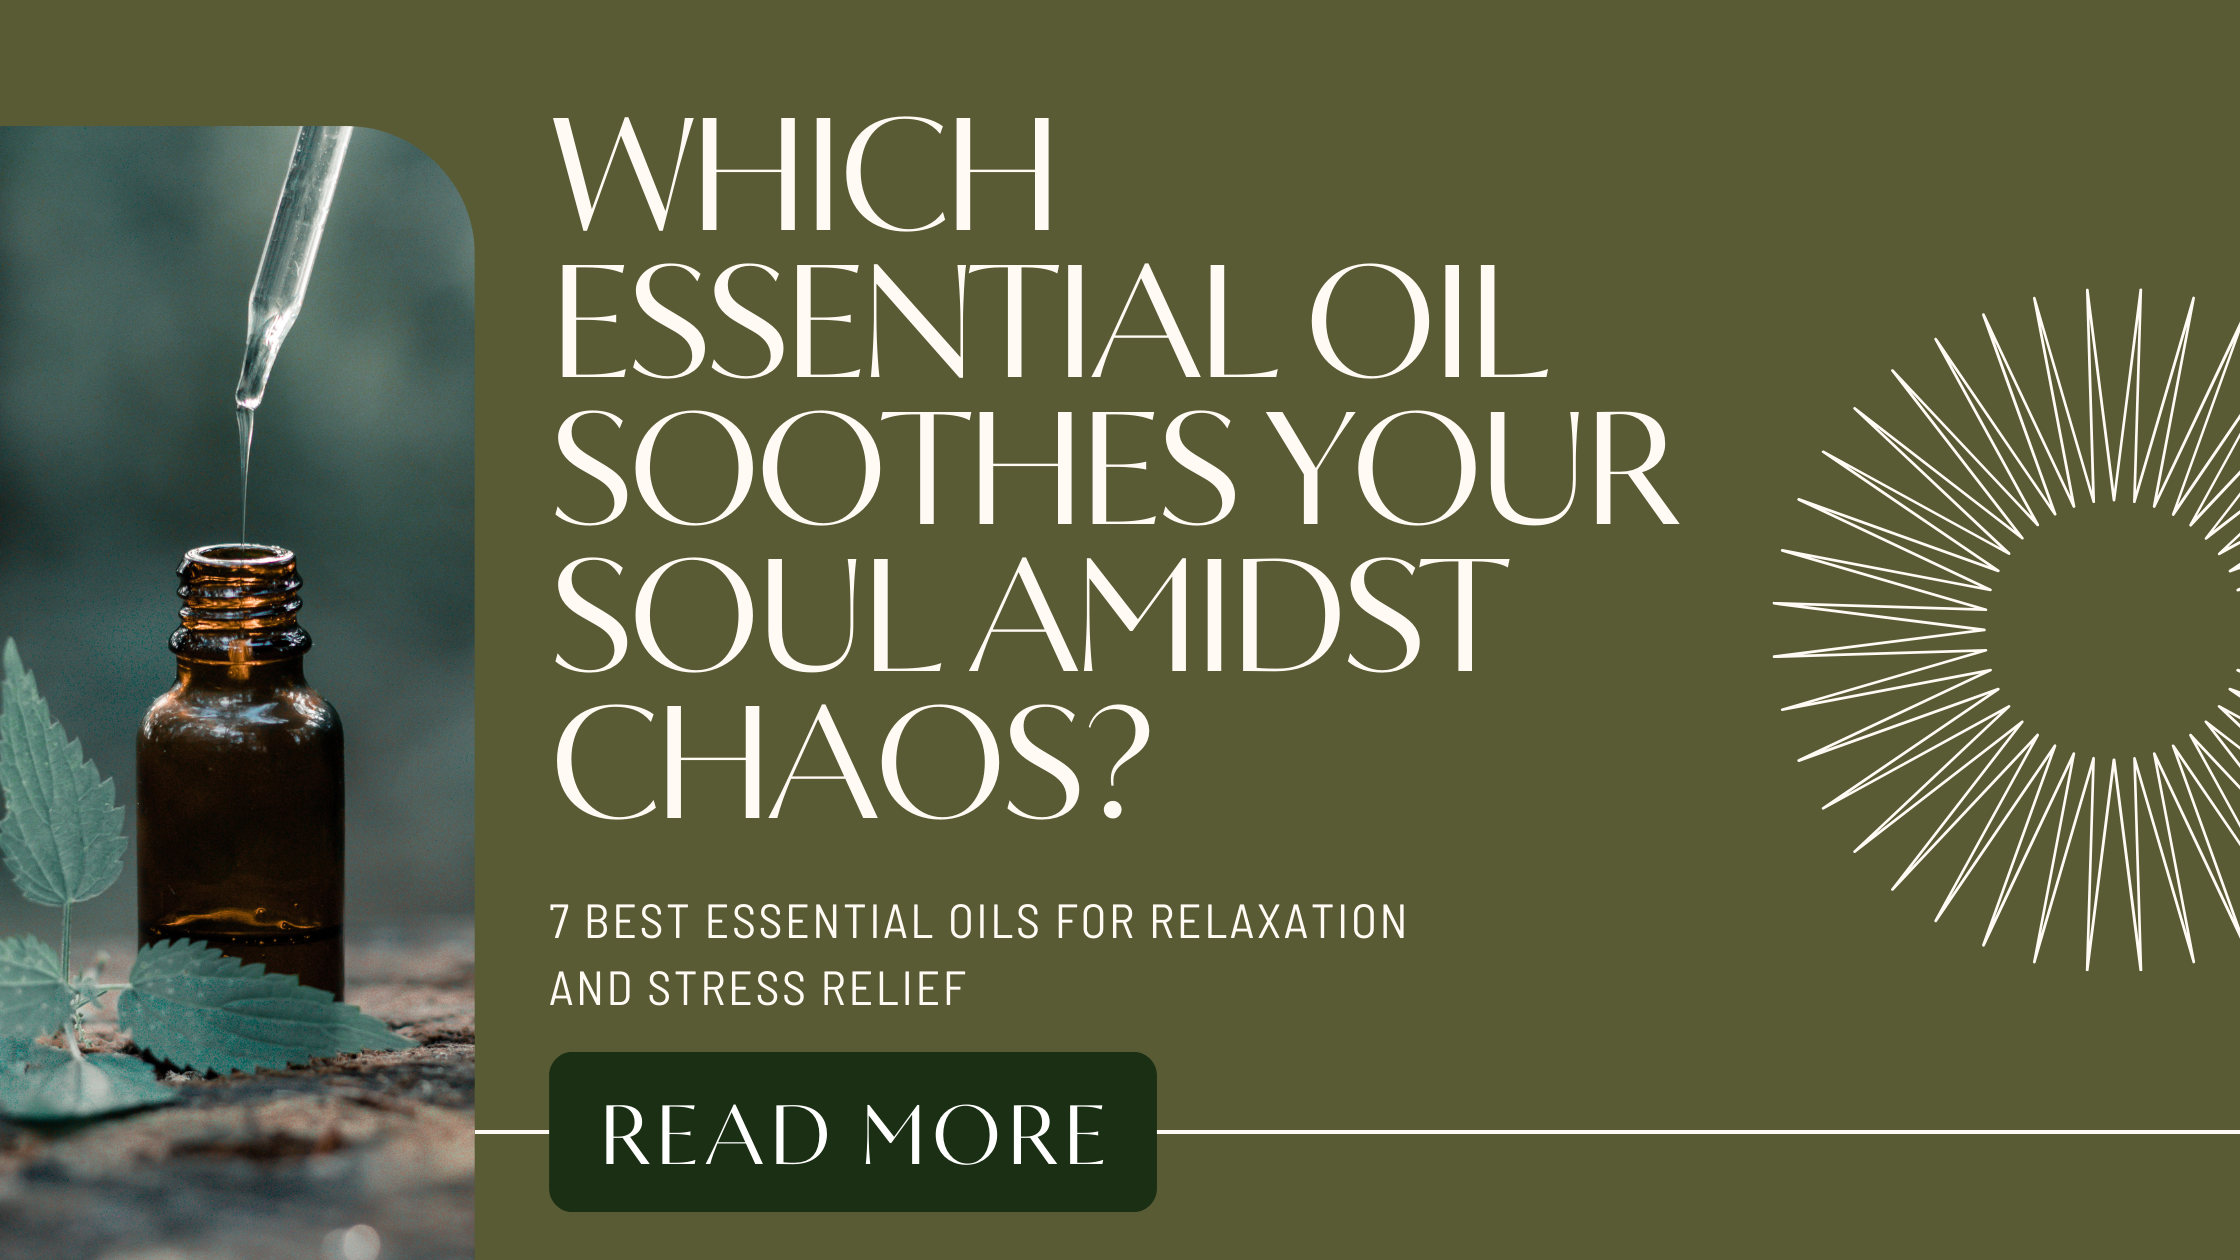 7 Best Essential Oils for Relaxation and Stress Relief